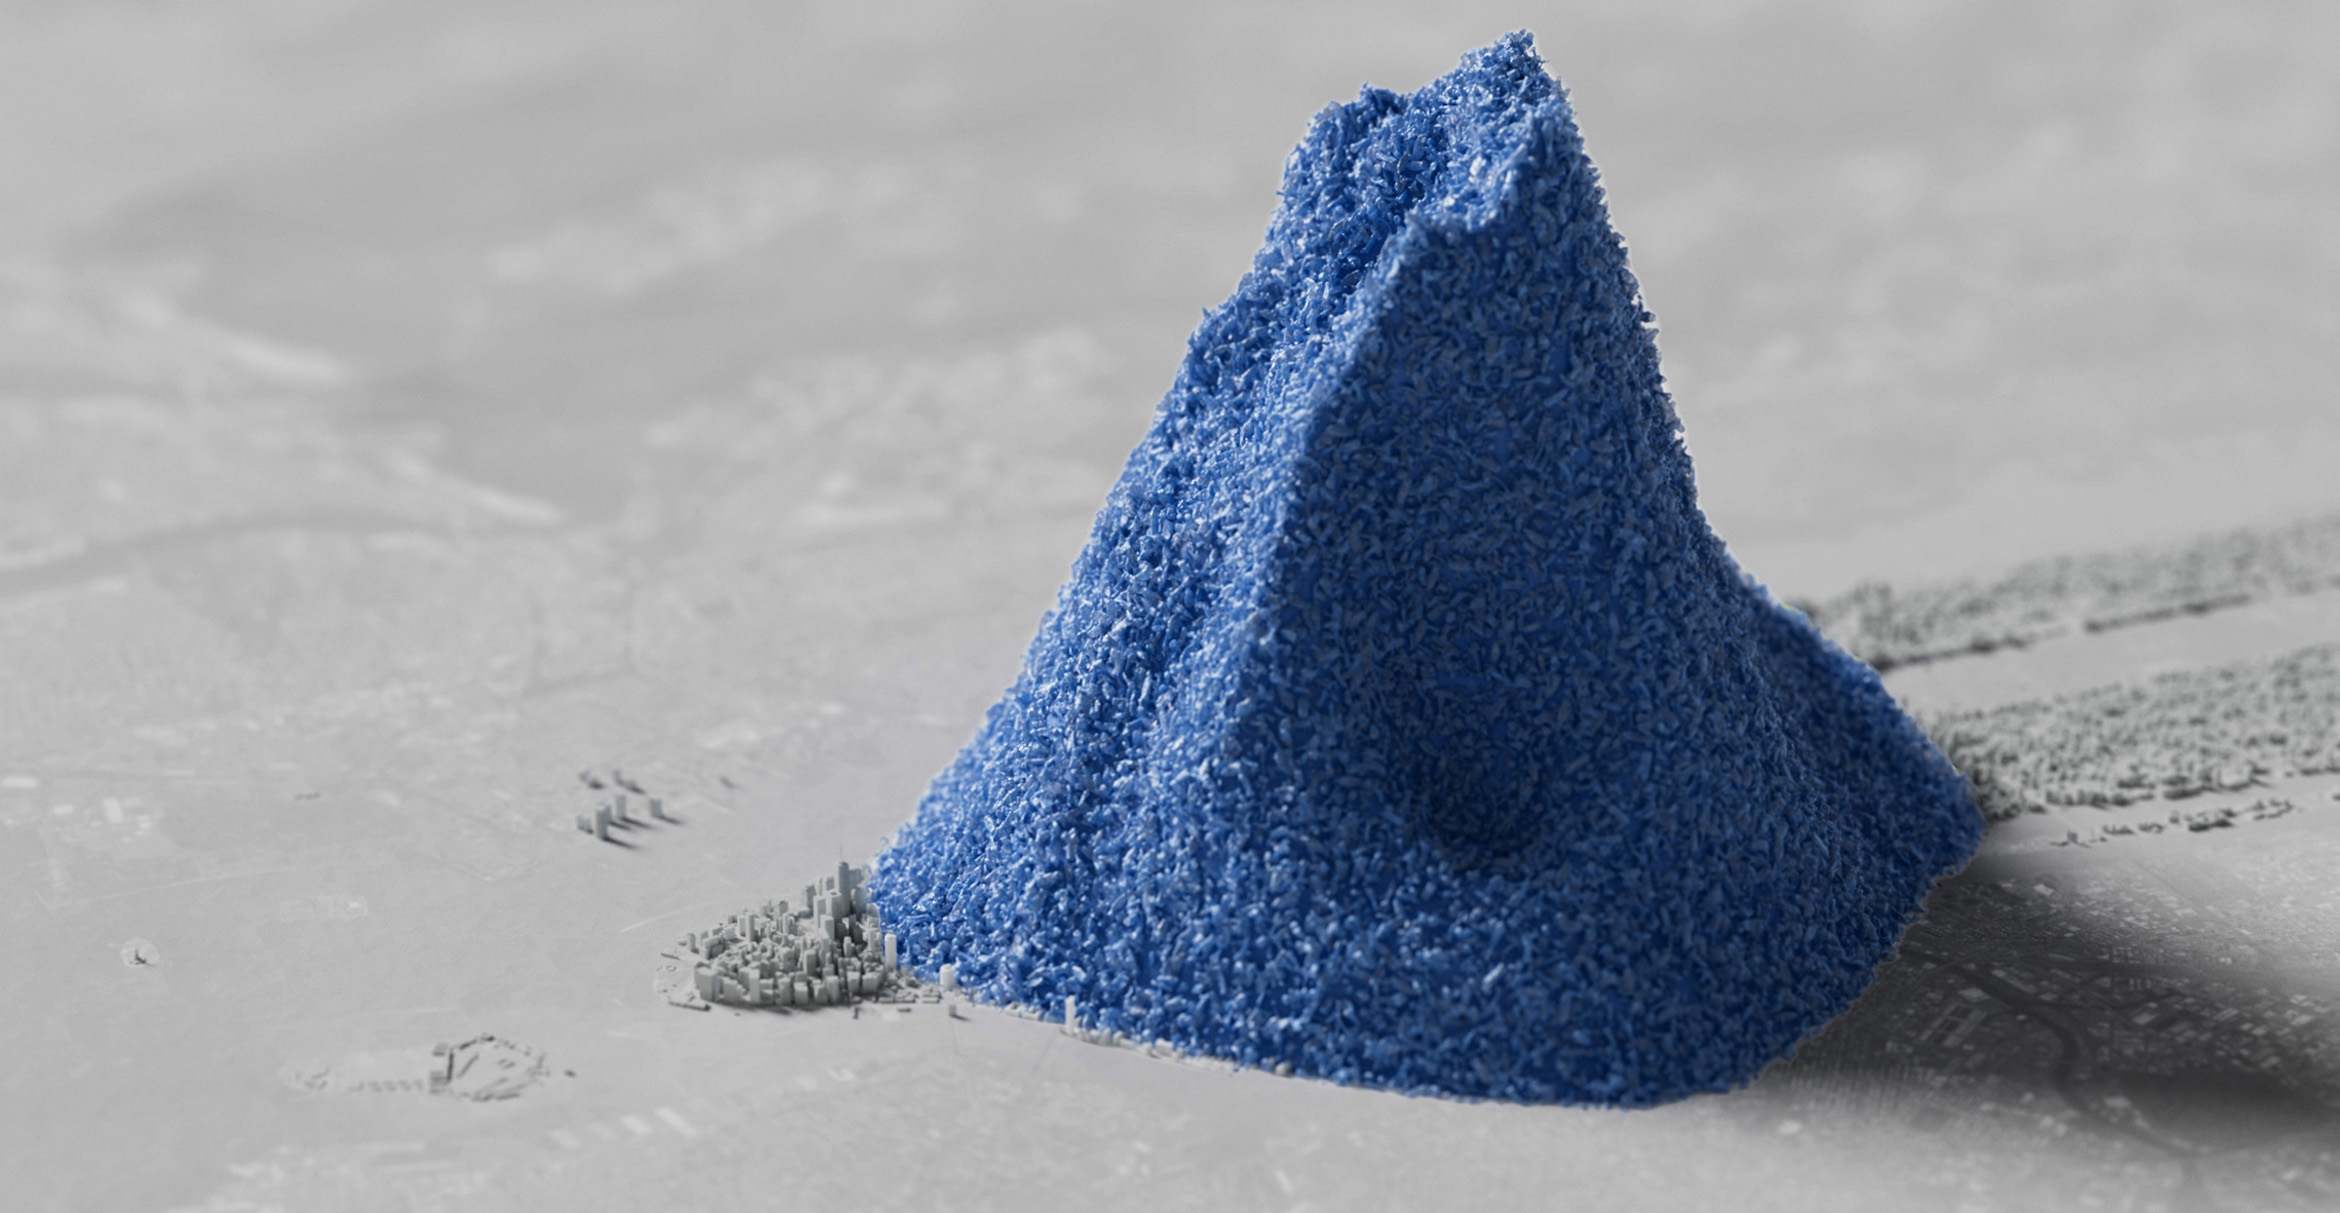 A large pile of small blue plastic objects rises from a relief map of Manhattan